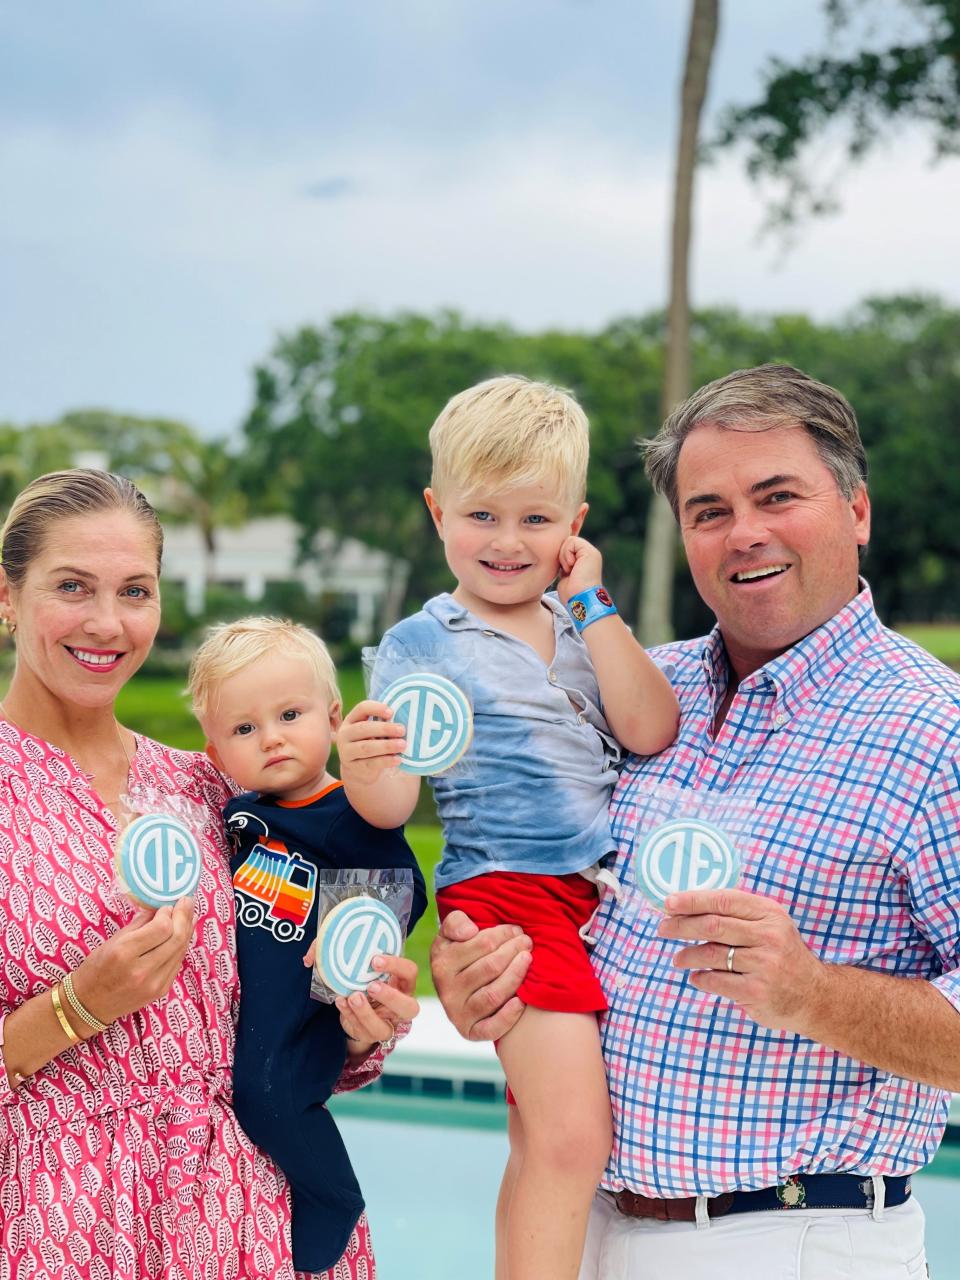 Michael Merrill, far right, with his wife Aurelija Merrill, left, and their two boys, Jack and Hudson.